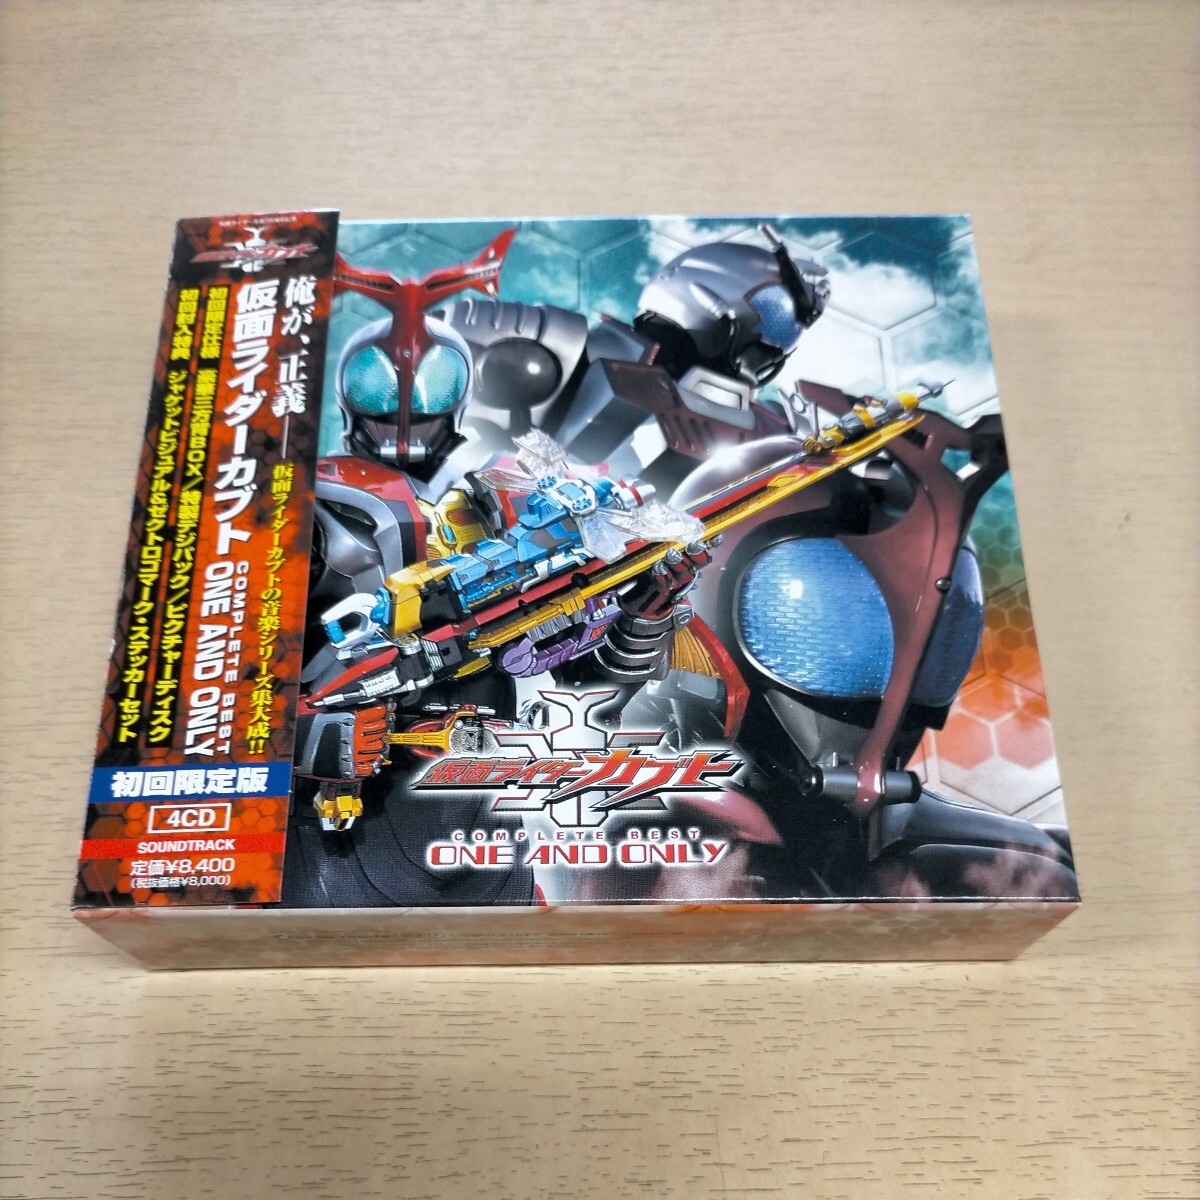  Kamen Rider Kabuto COMPLETE BEST ONE AND ONLY the first times limitation version with belt * used / reproduction not yet verification / no claim ./ present condition delivery / sticker attaching 